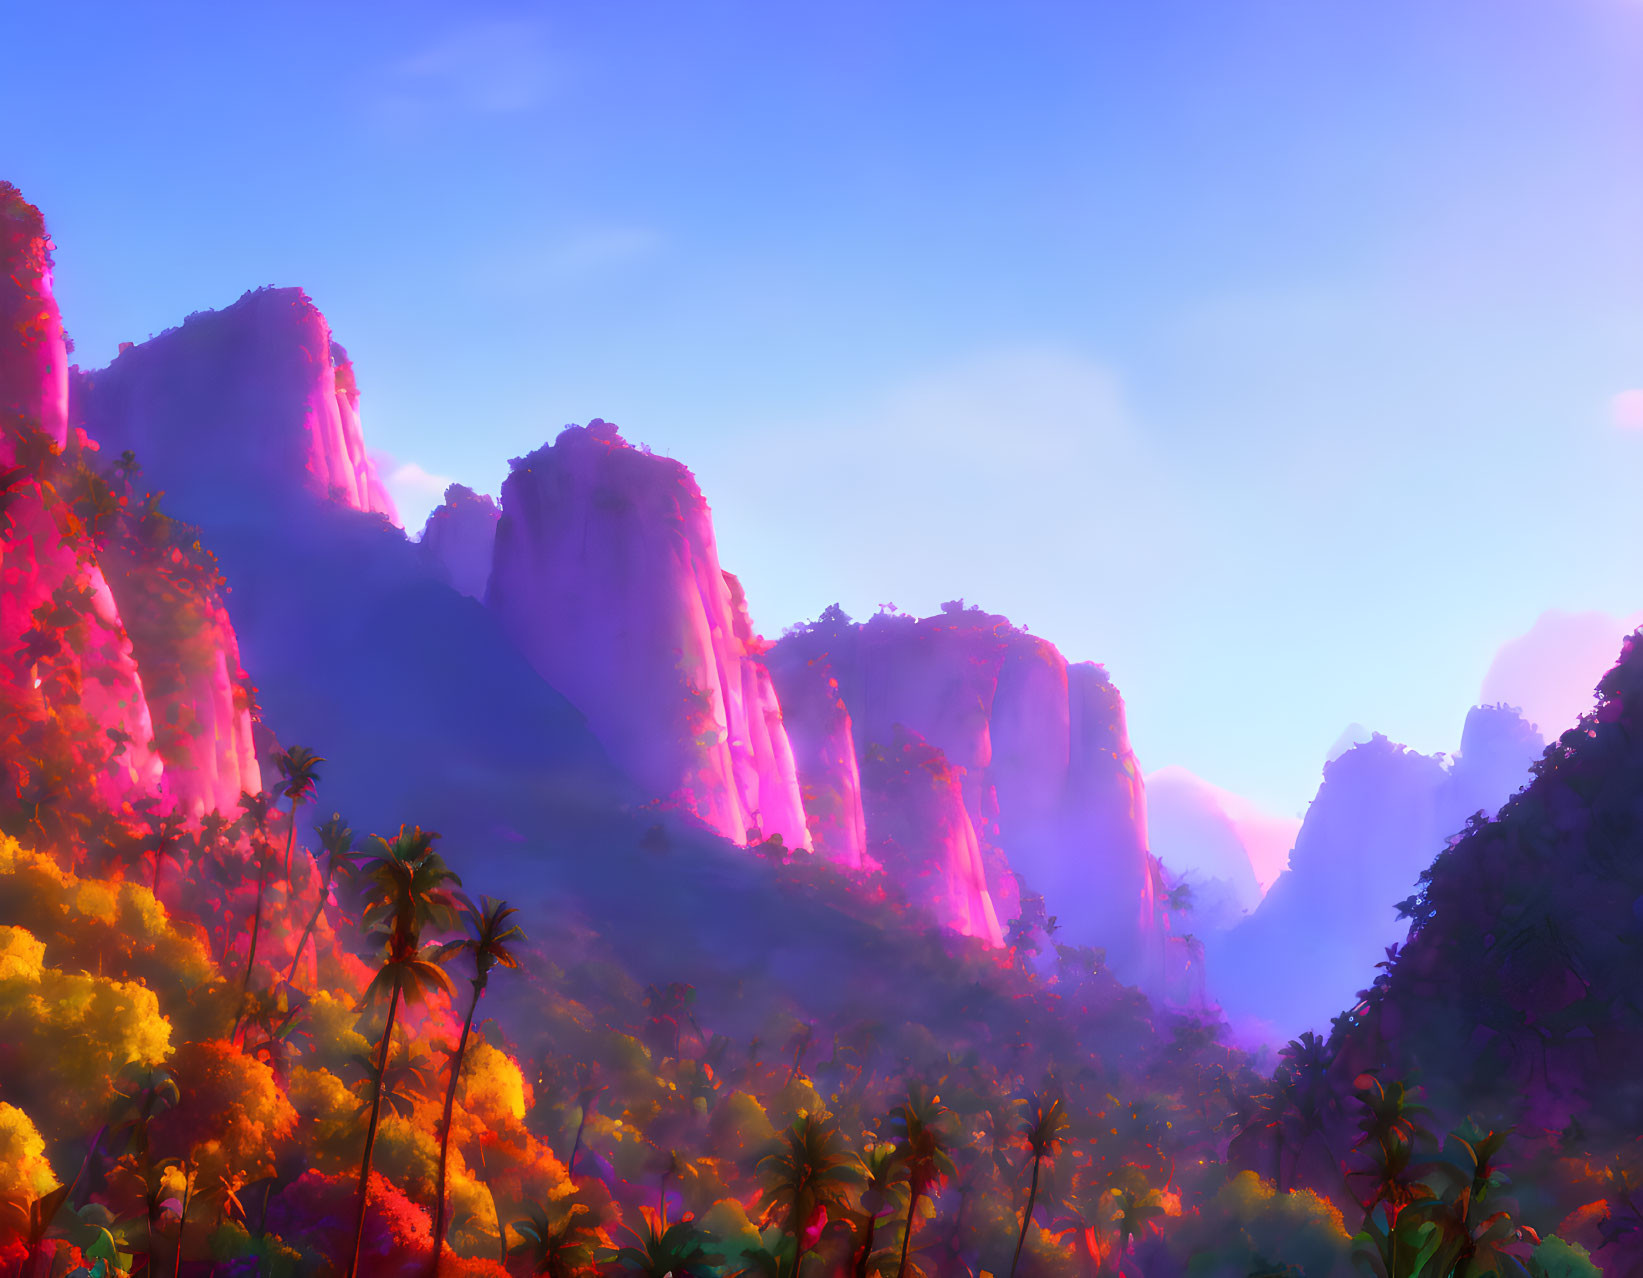 Lush Forest Landscape with Towering Cliffs in Soft Pink Glow